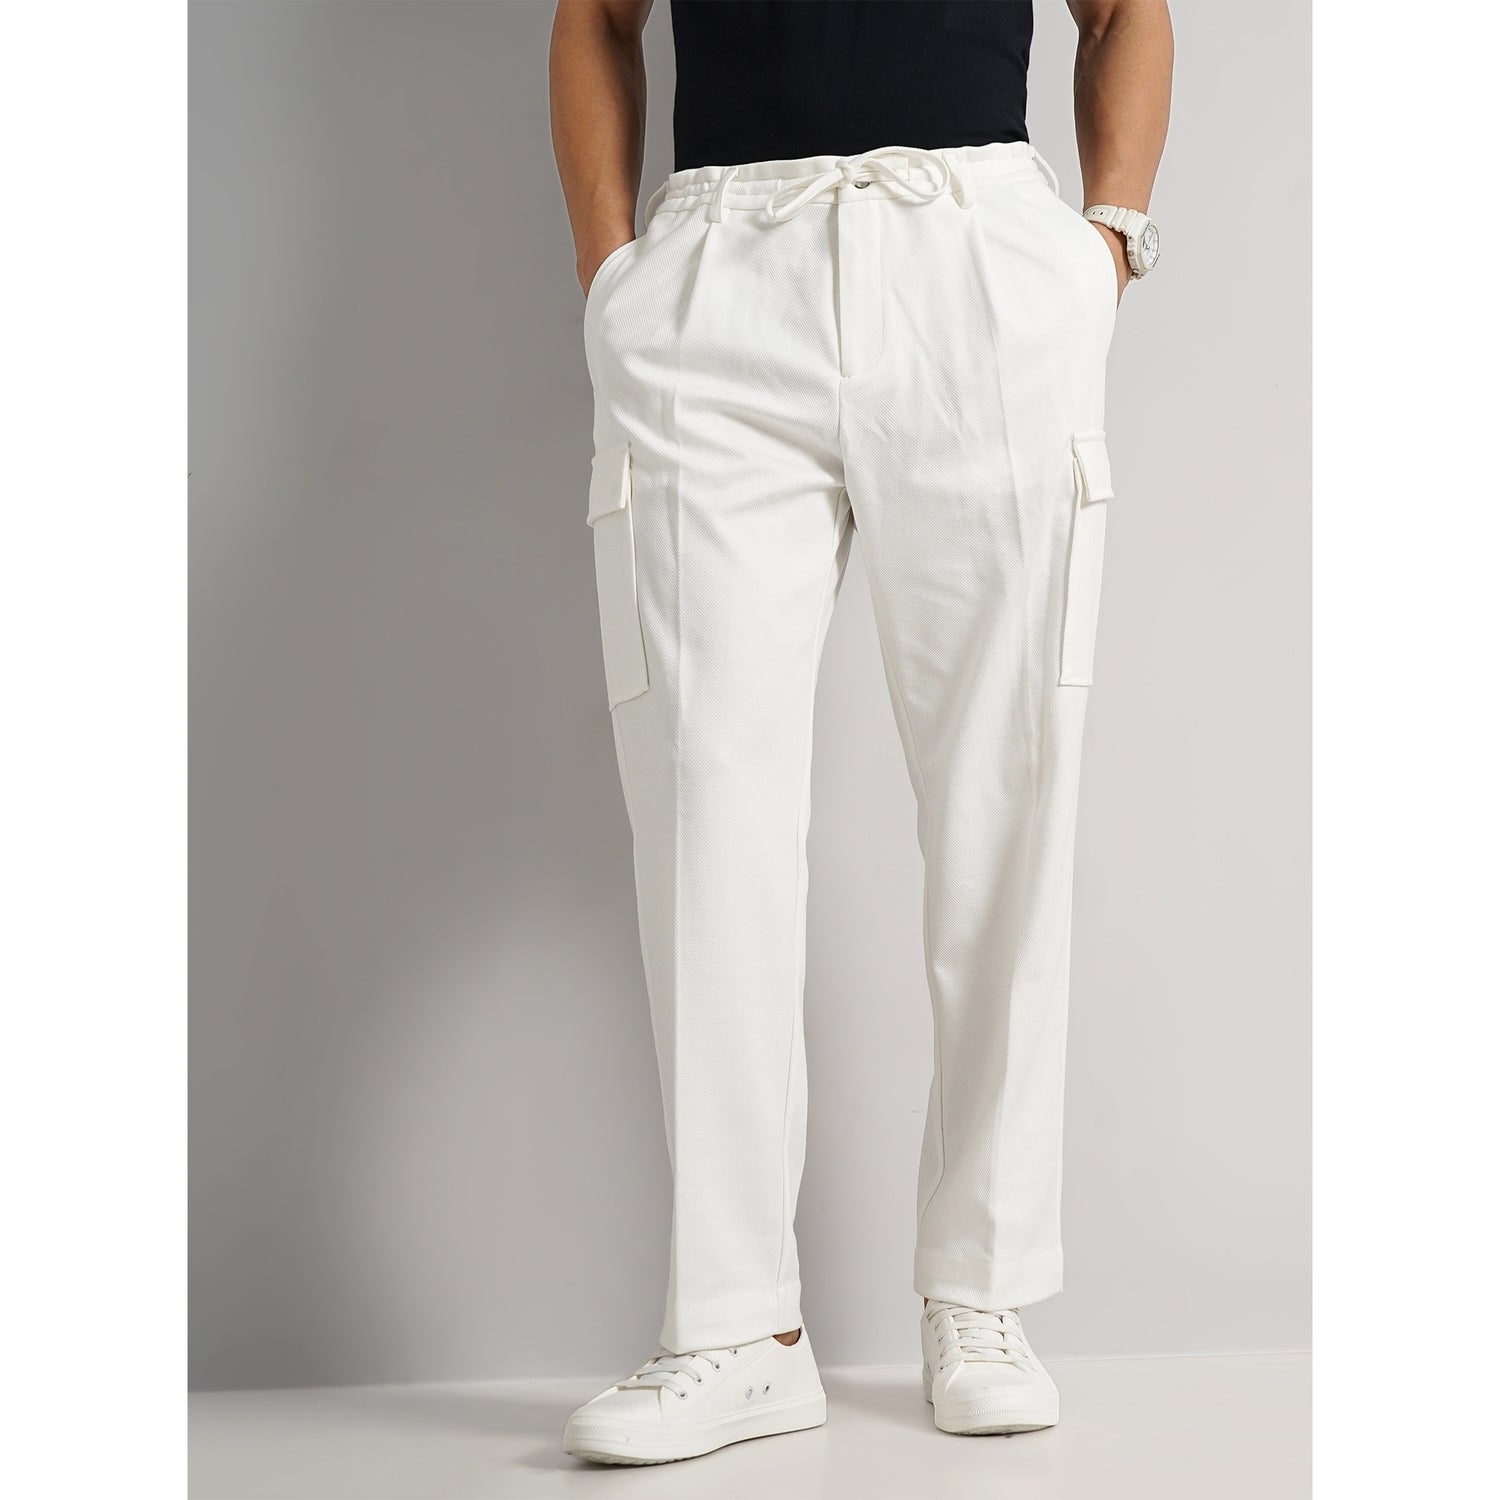 Men's Off White Solid Regular Fit Cotton Trousers (GOTWILL)